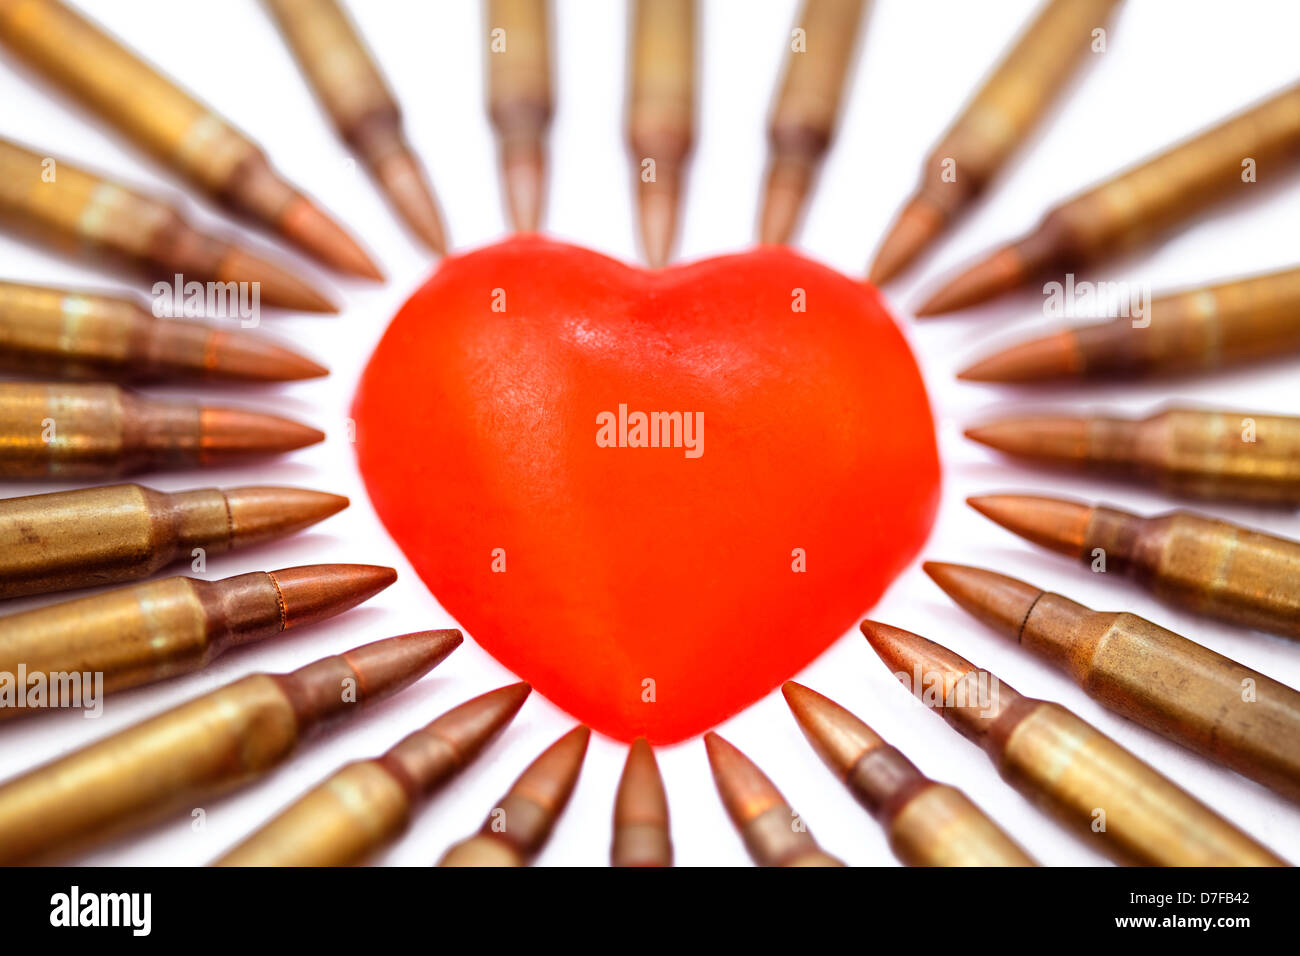 https://c8.alamy.com/comp/D7FB42/a-heart-shaped-bar-soap-is-surrounded-by-556-cartridges-pointing-at-D7FB42.jpg